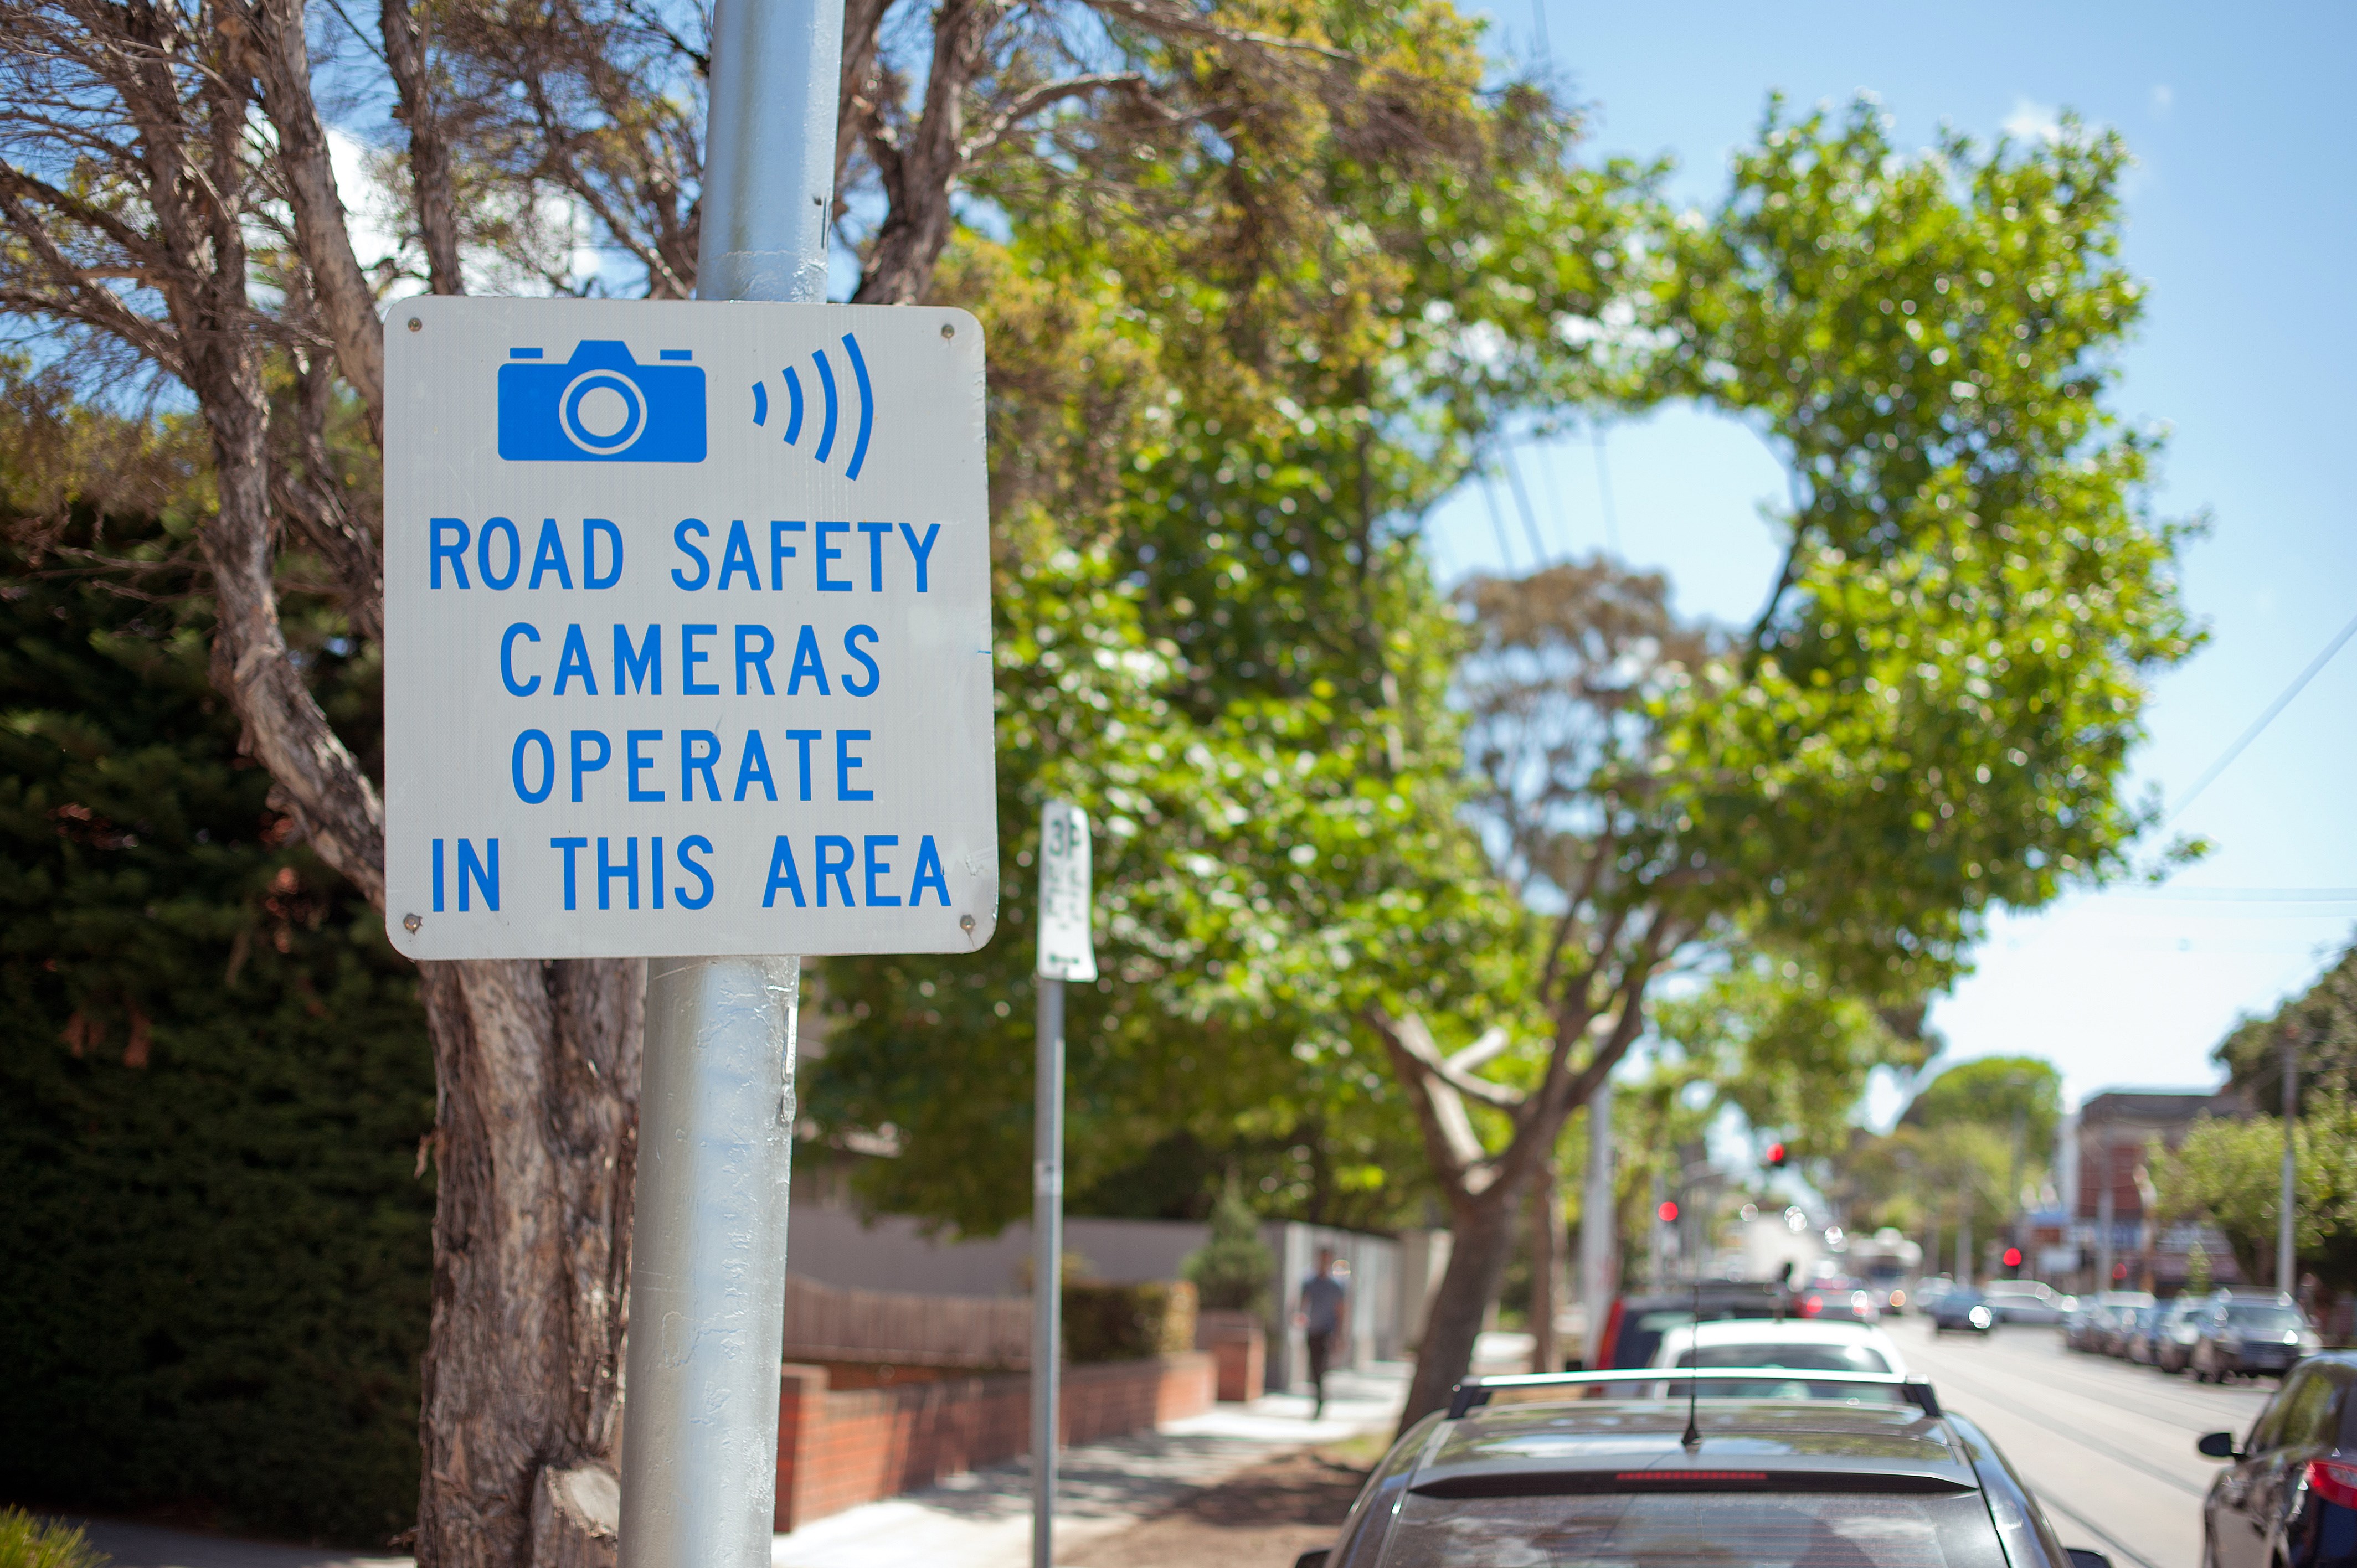 Reasearch shows traffic cameras reduce road trauma.